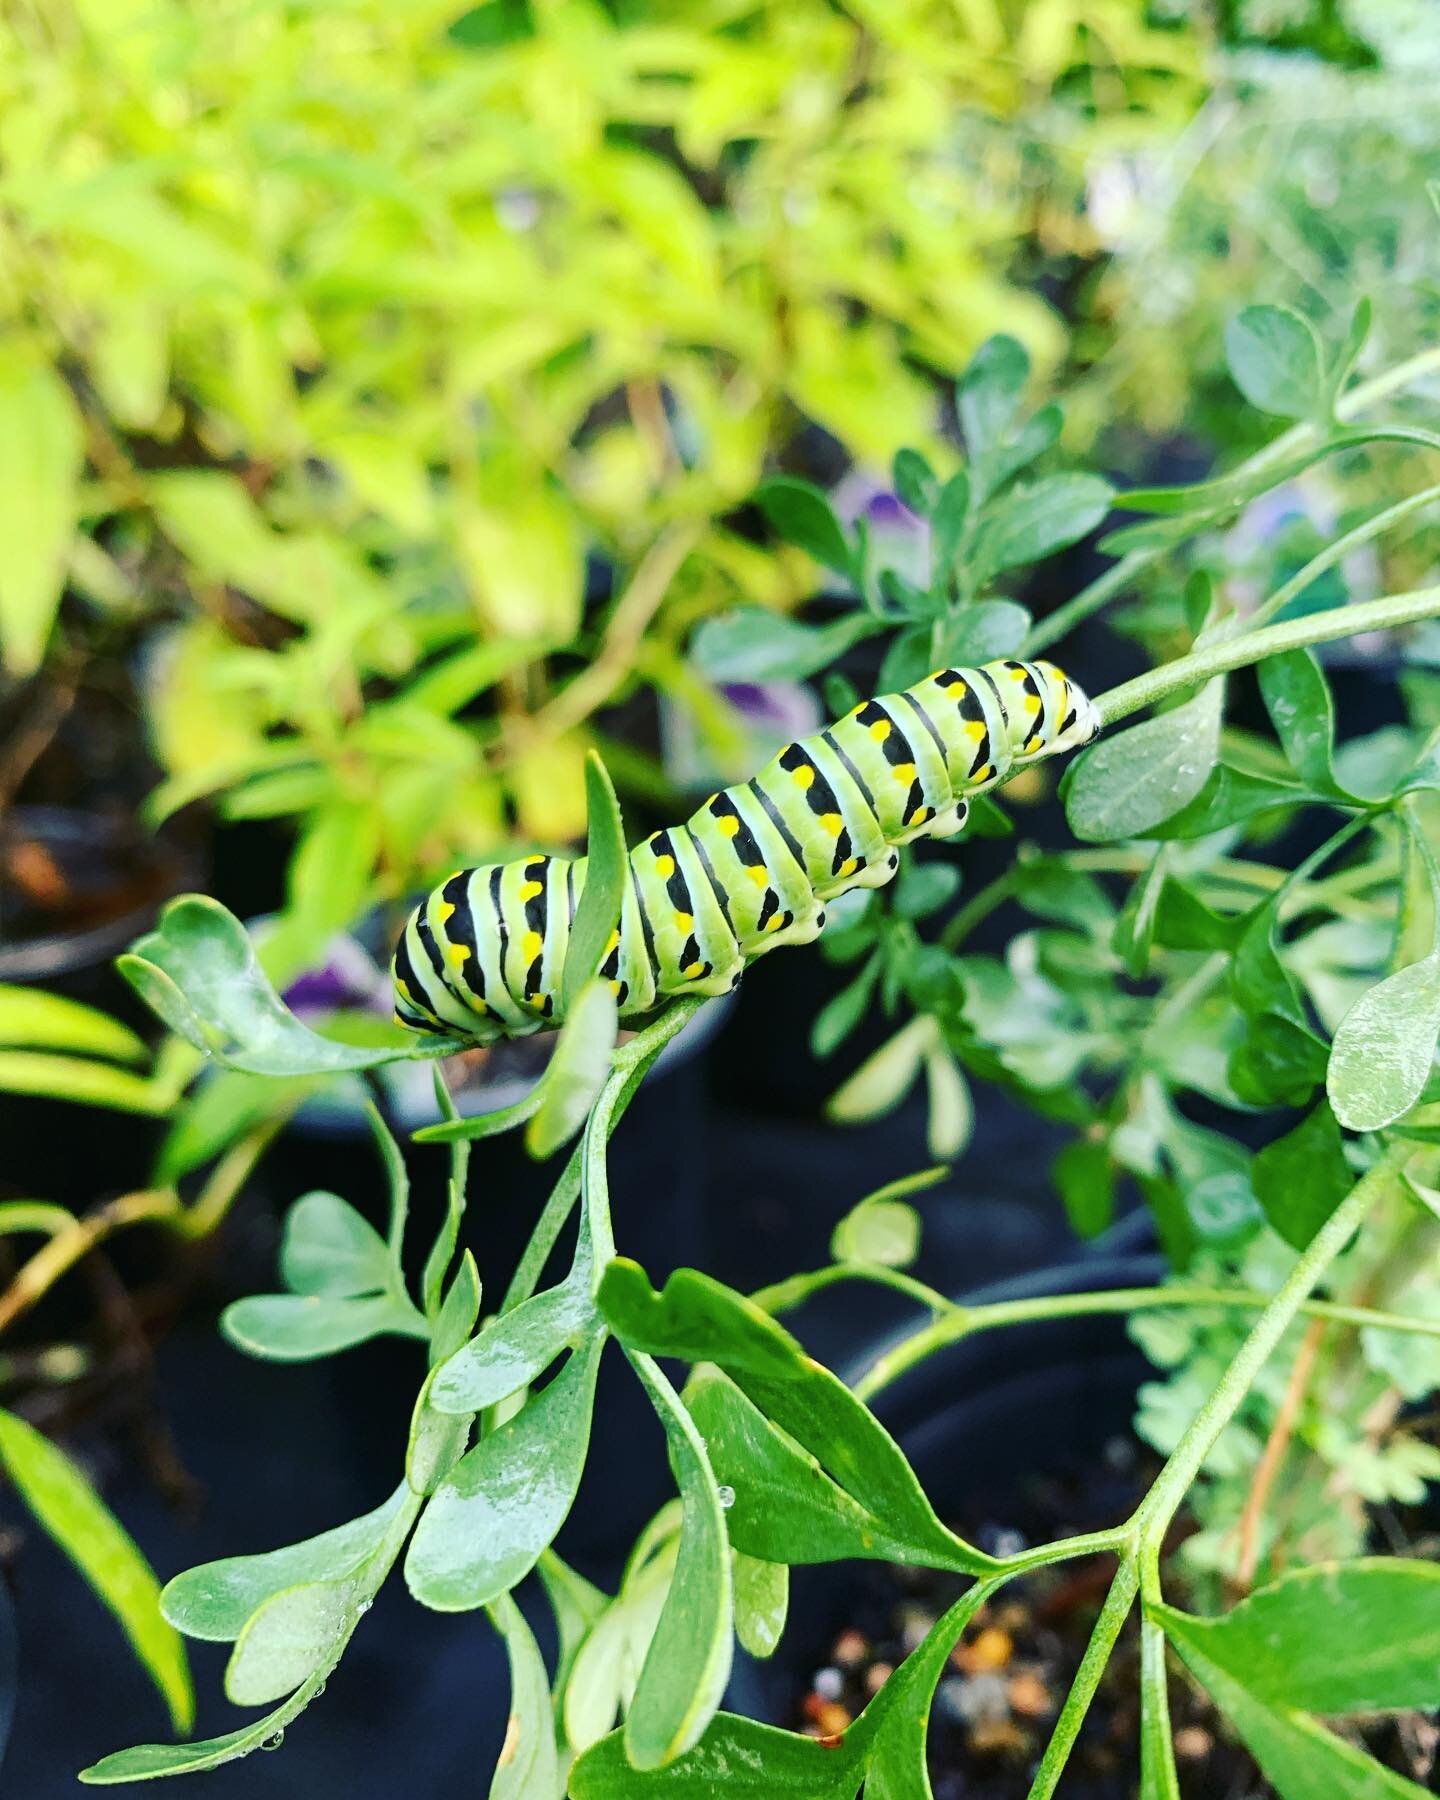 Found this fella munching on some rue this morning! Can anyone guess what kind of caterpillar he is?